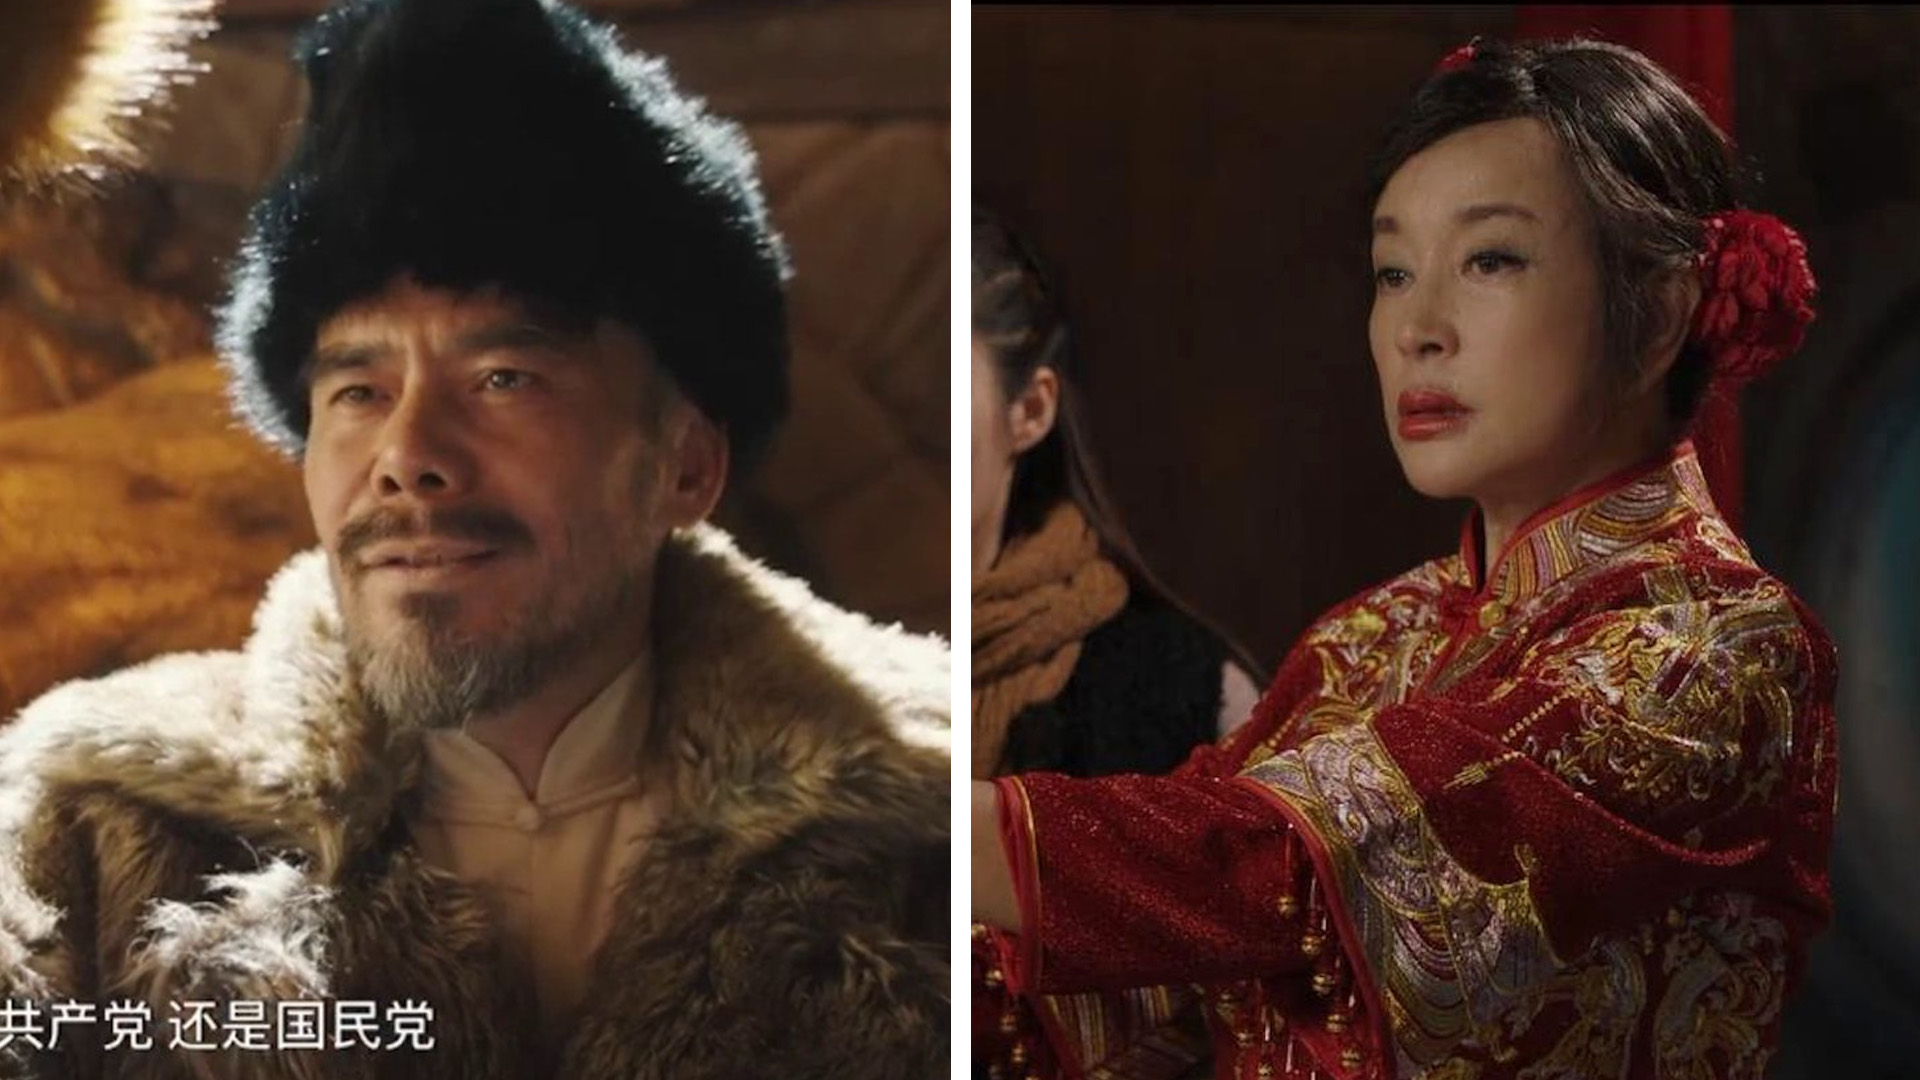 The actor, who plays Xiaoqing's dad in the movie, is only 53. 